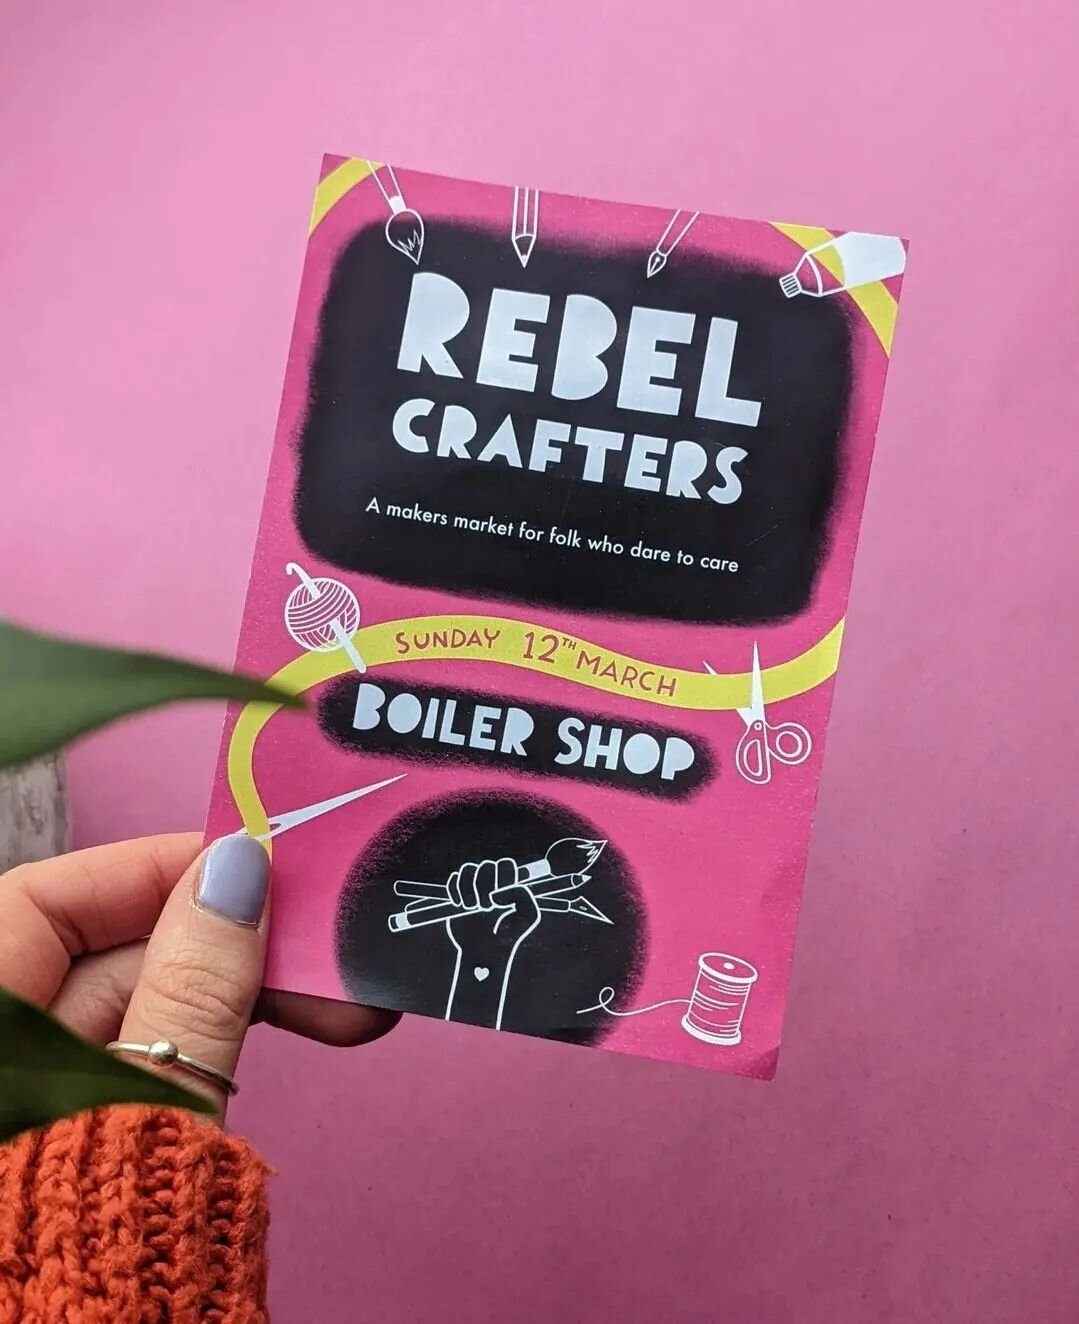 🥳🛍Ready for my first market of the year! Catch the #LewkGoodDoGood stall at @rebelcrafters !!🎉 12 days until the very first Rebel Crafter's Market 🎉 

 🌟 Rebel Crafter's Market 🌟 Sunday March 12th 🌟 At the @boiler_shop 🌟 10am - 4pm 🌟